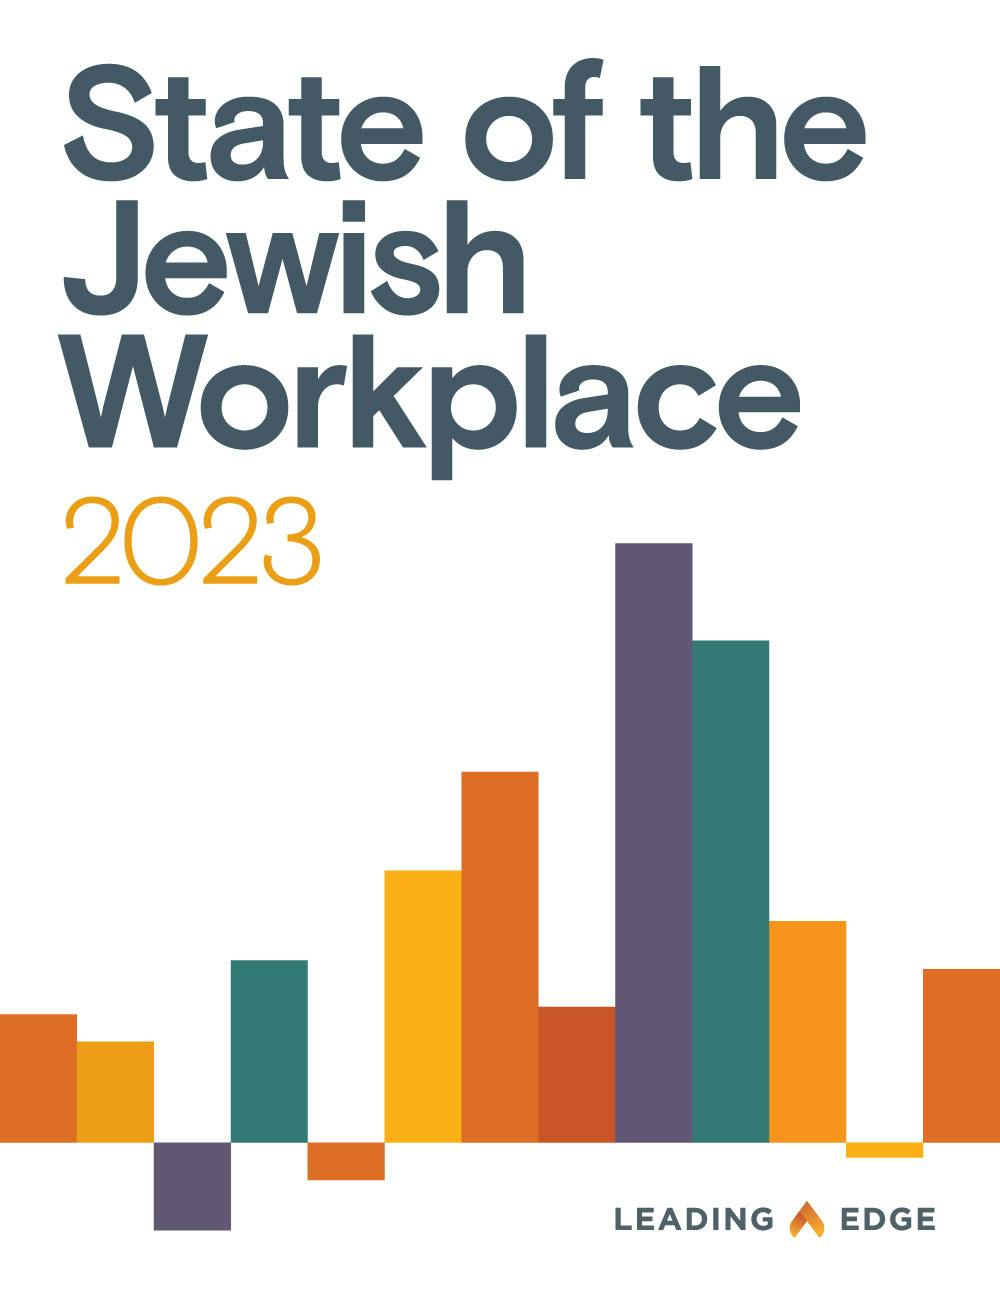 State of the Jewish Workplace 2023